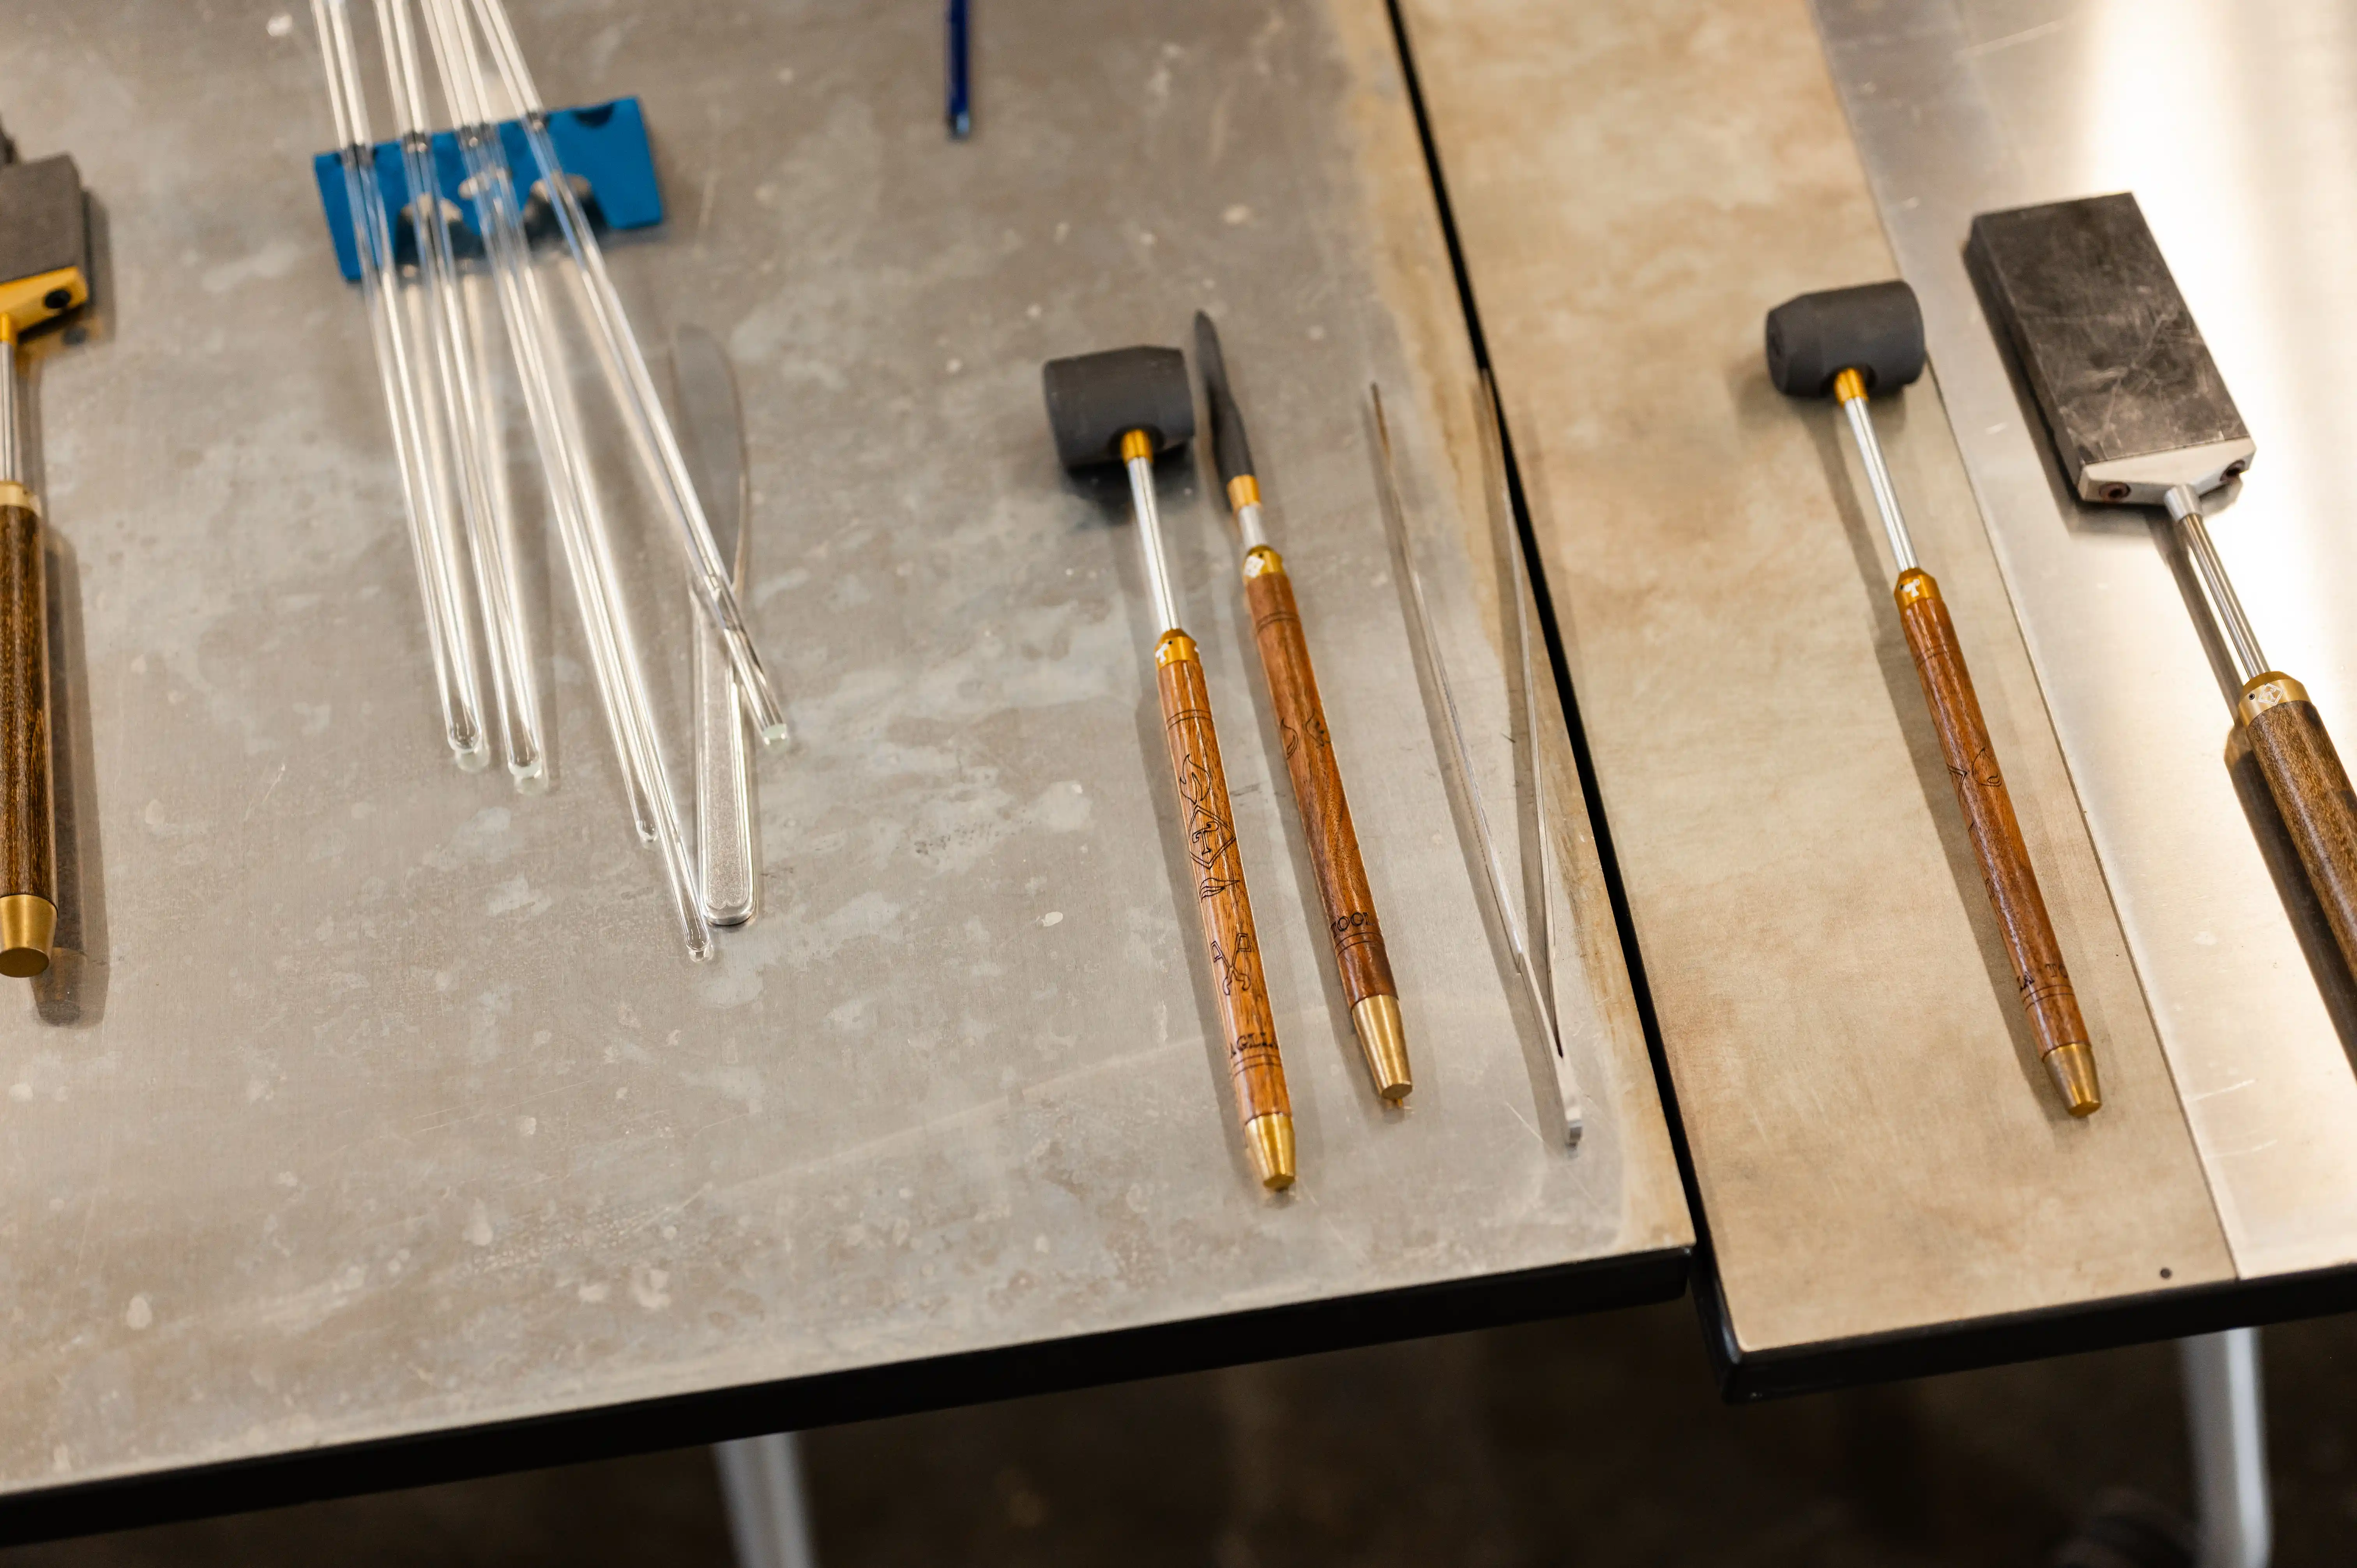 Glassblowing tools including tweezers, paddles, and jacks organized on a metal workbench.